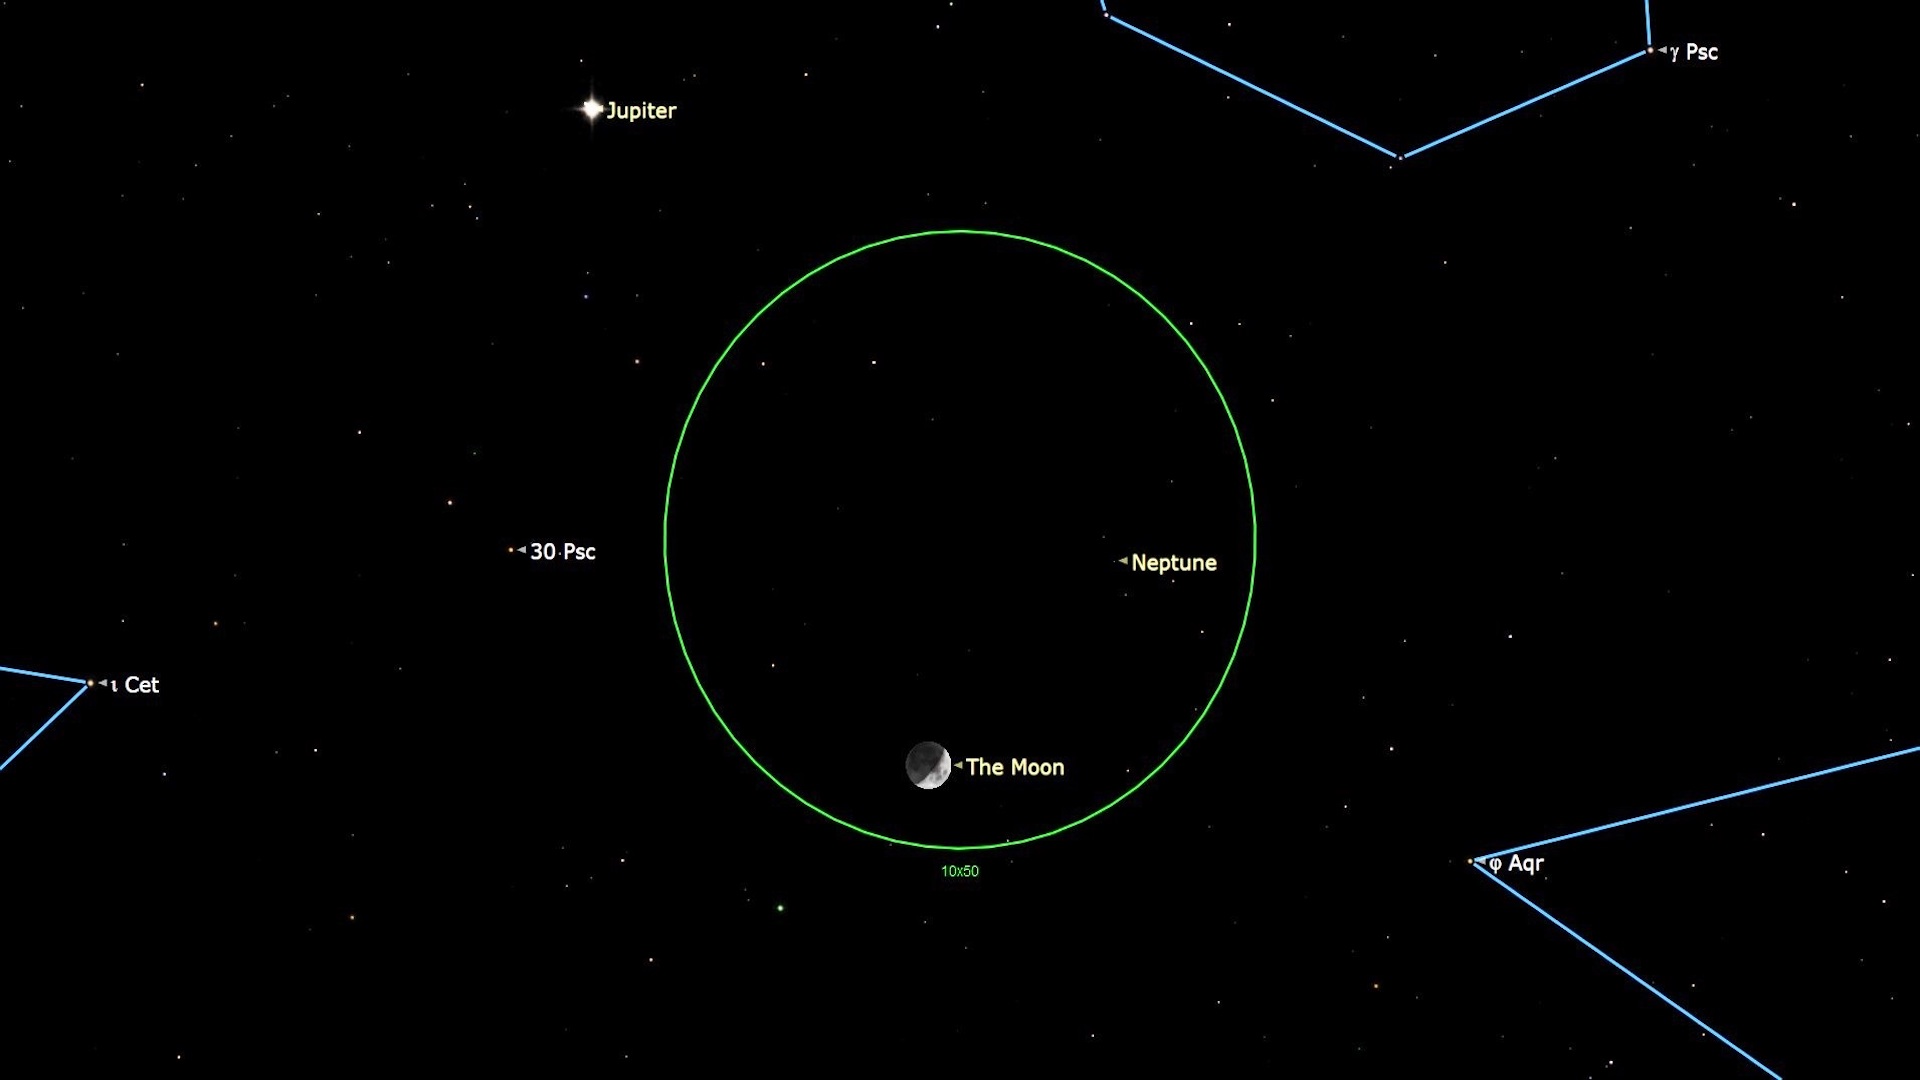 An illustration of the night sky on Dec. 28 showing the positions of Neptune and Jupiter relative to the moon.